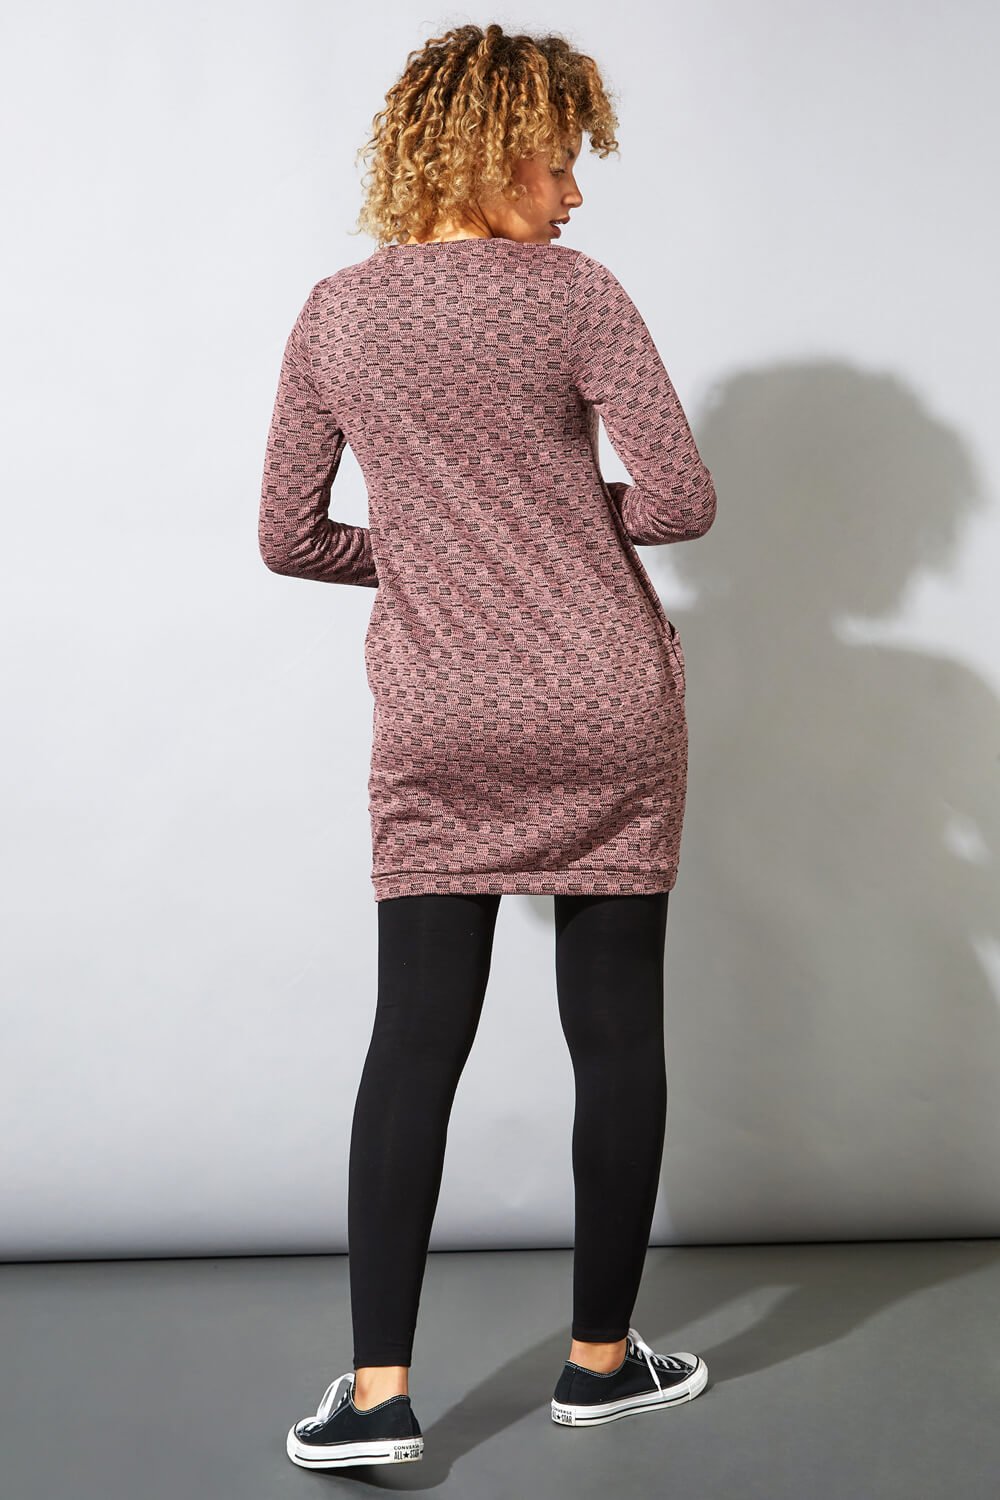 PINK Check Detail Textured Tunic Dress, Image 3 of 5